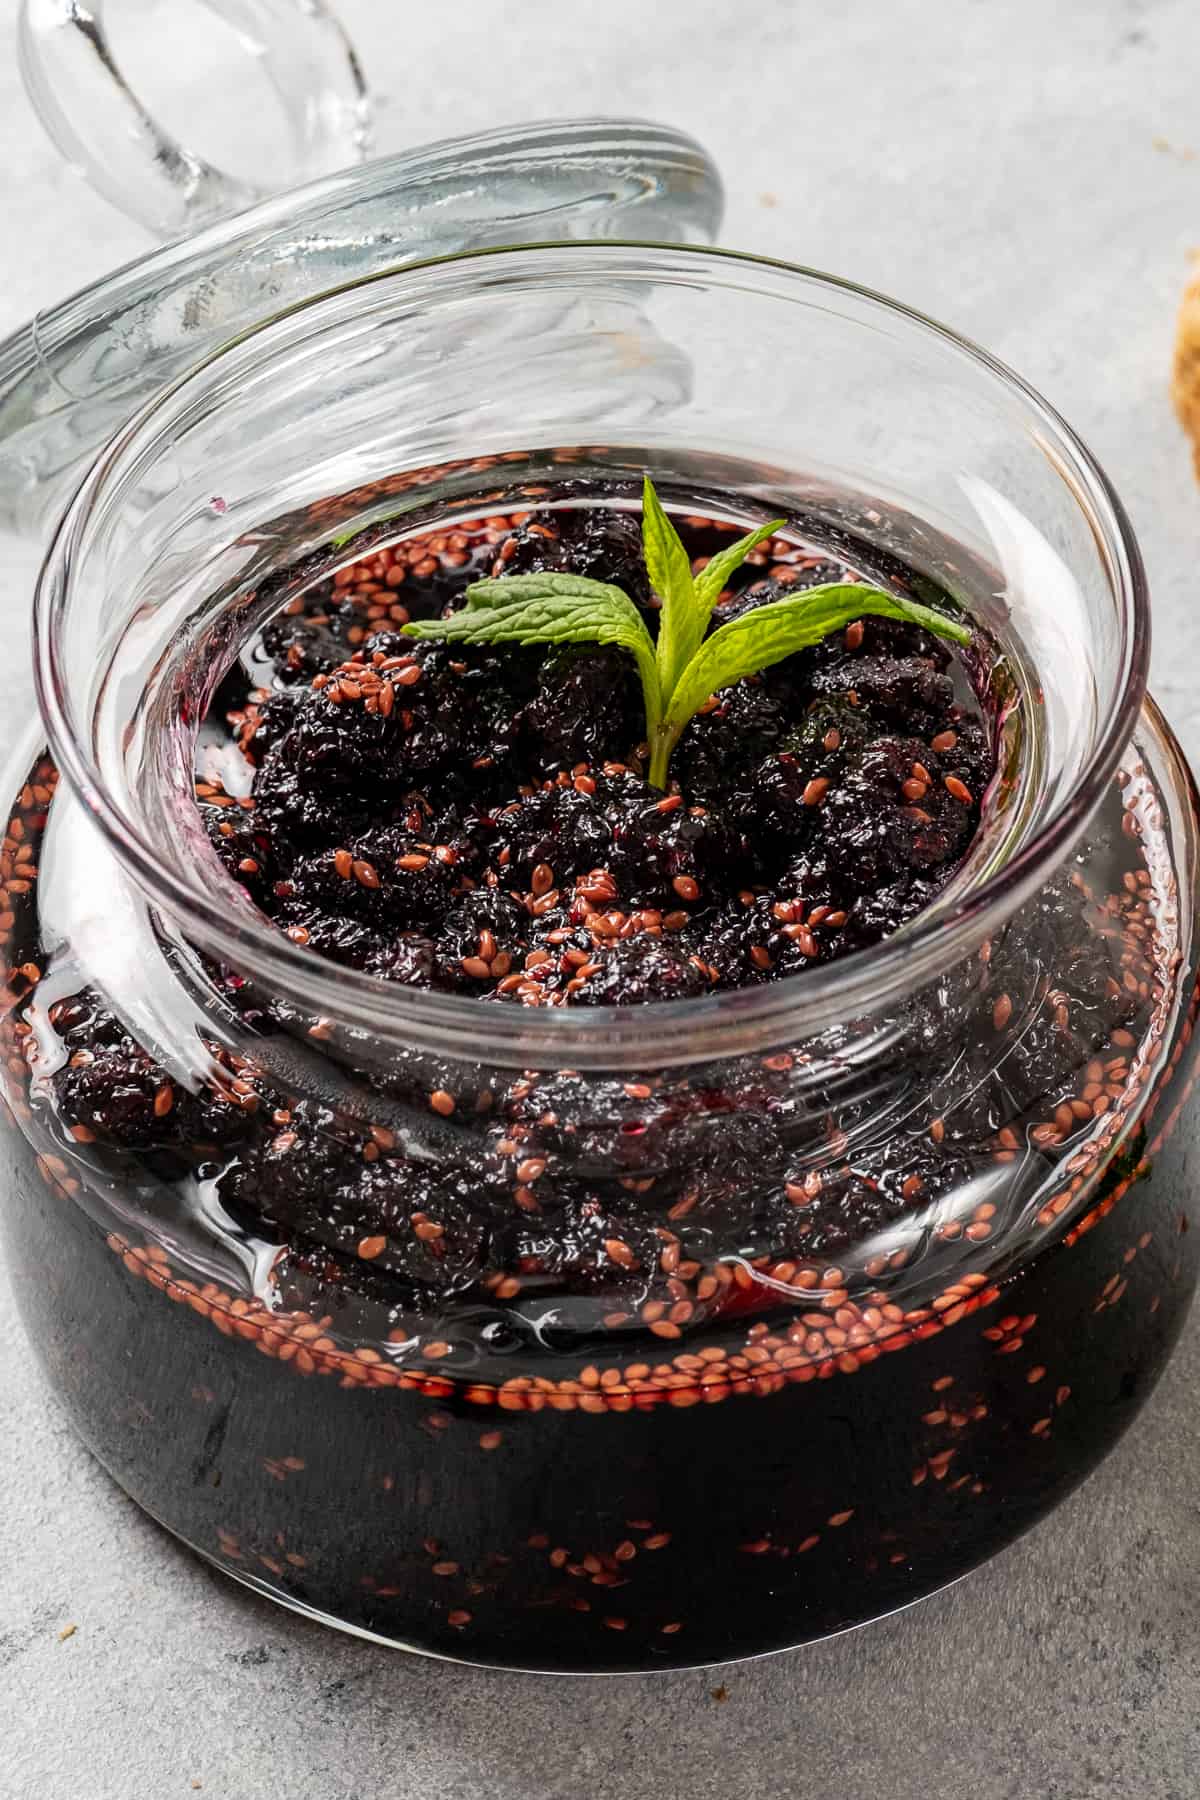 Mulberry jam in a jar, garnished with fresh mint.